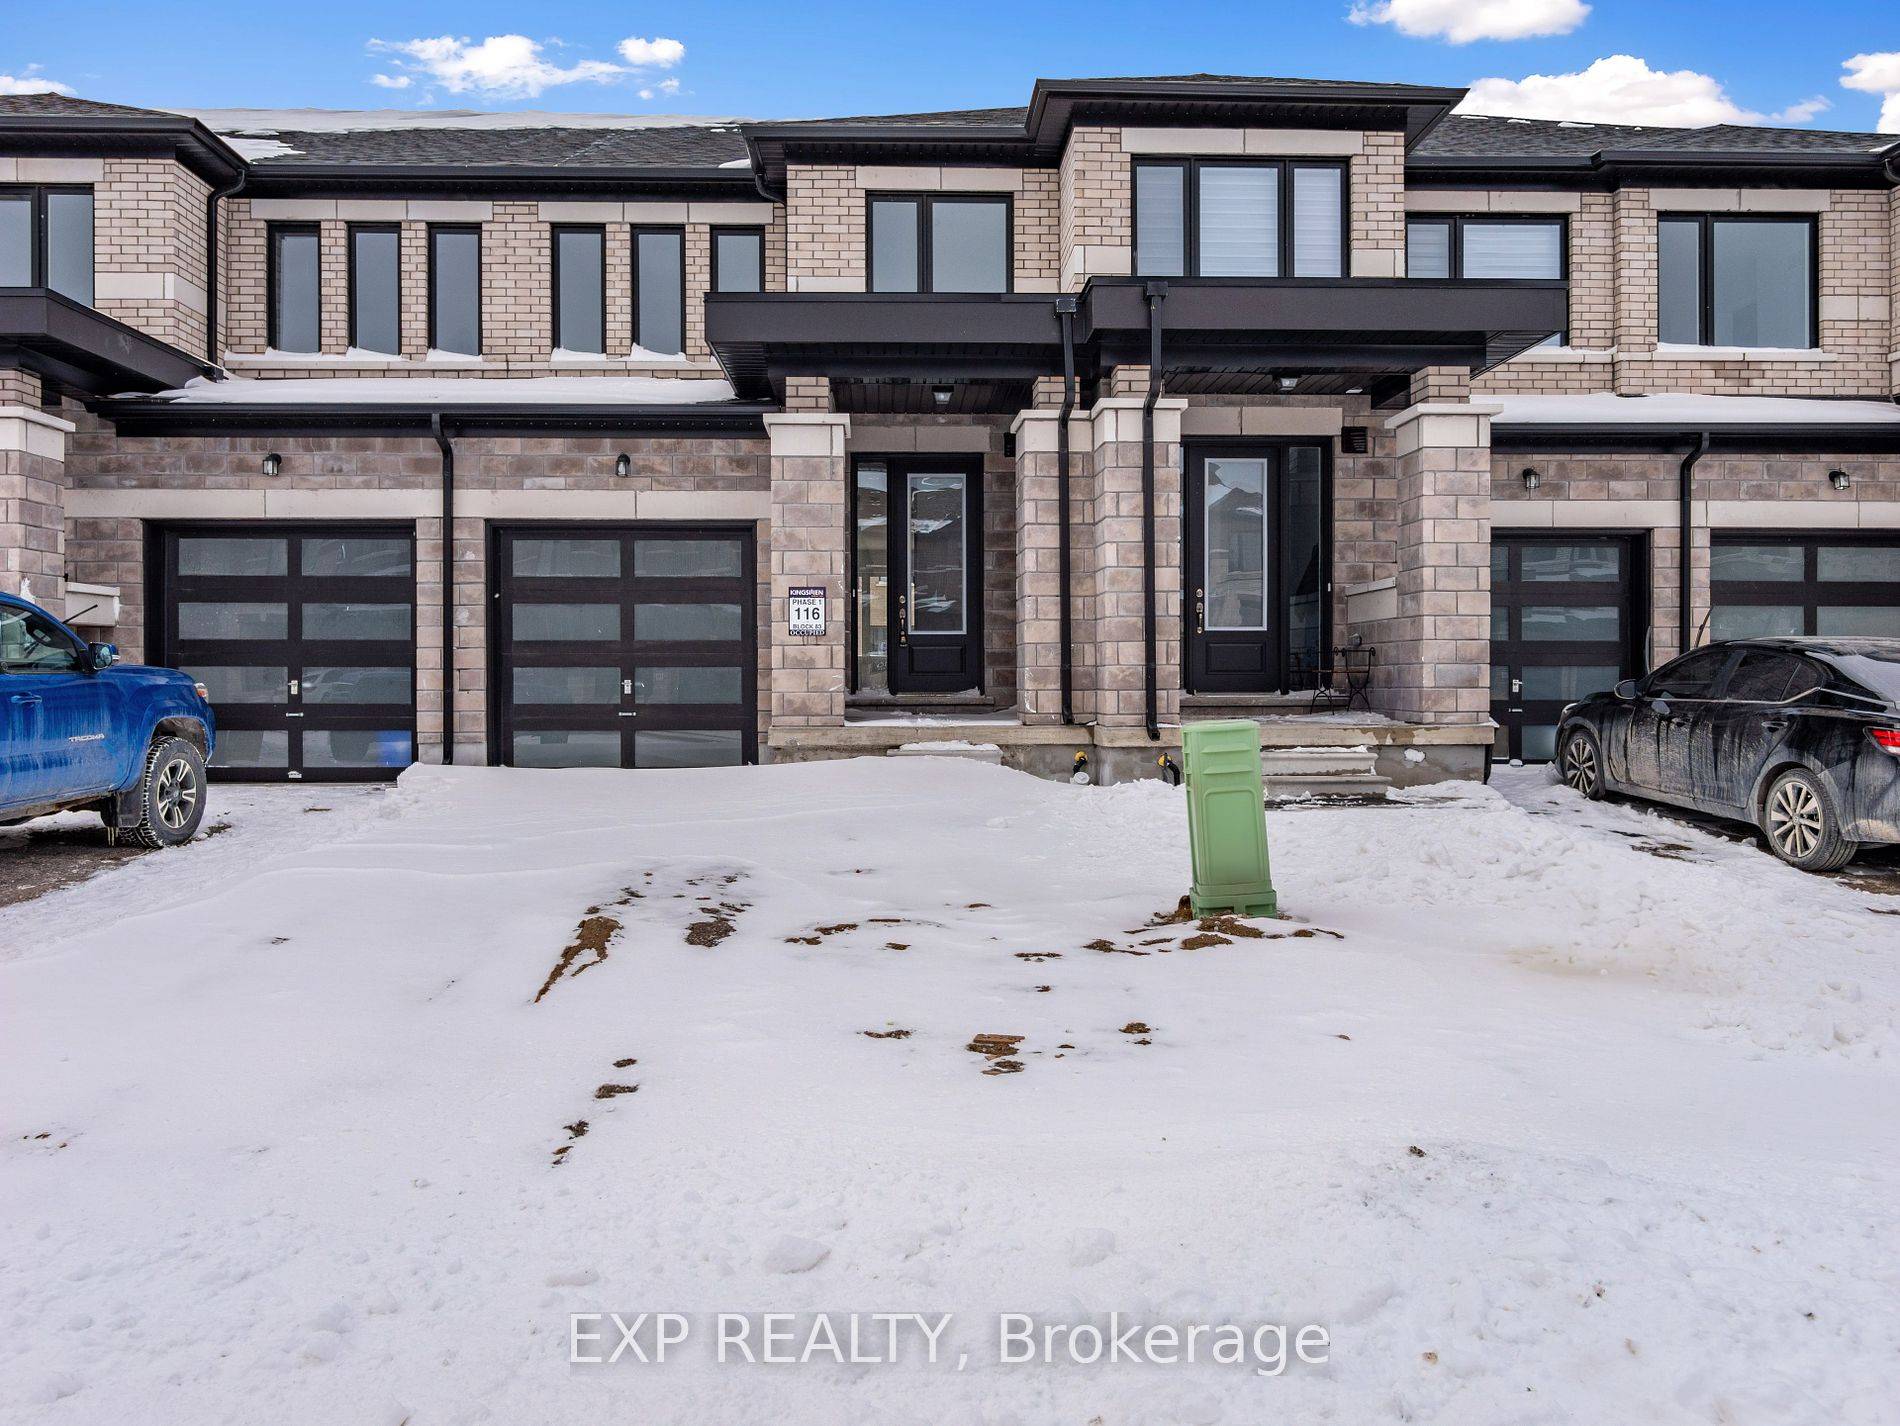 Welcome to 29 Keenan St, a contemporary haven in Lindsay's coveted Sugarwood Development.